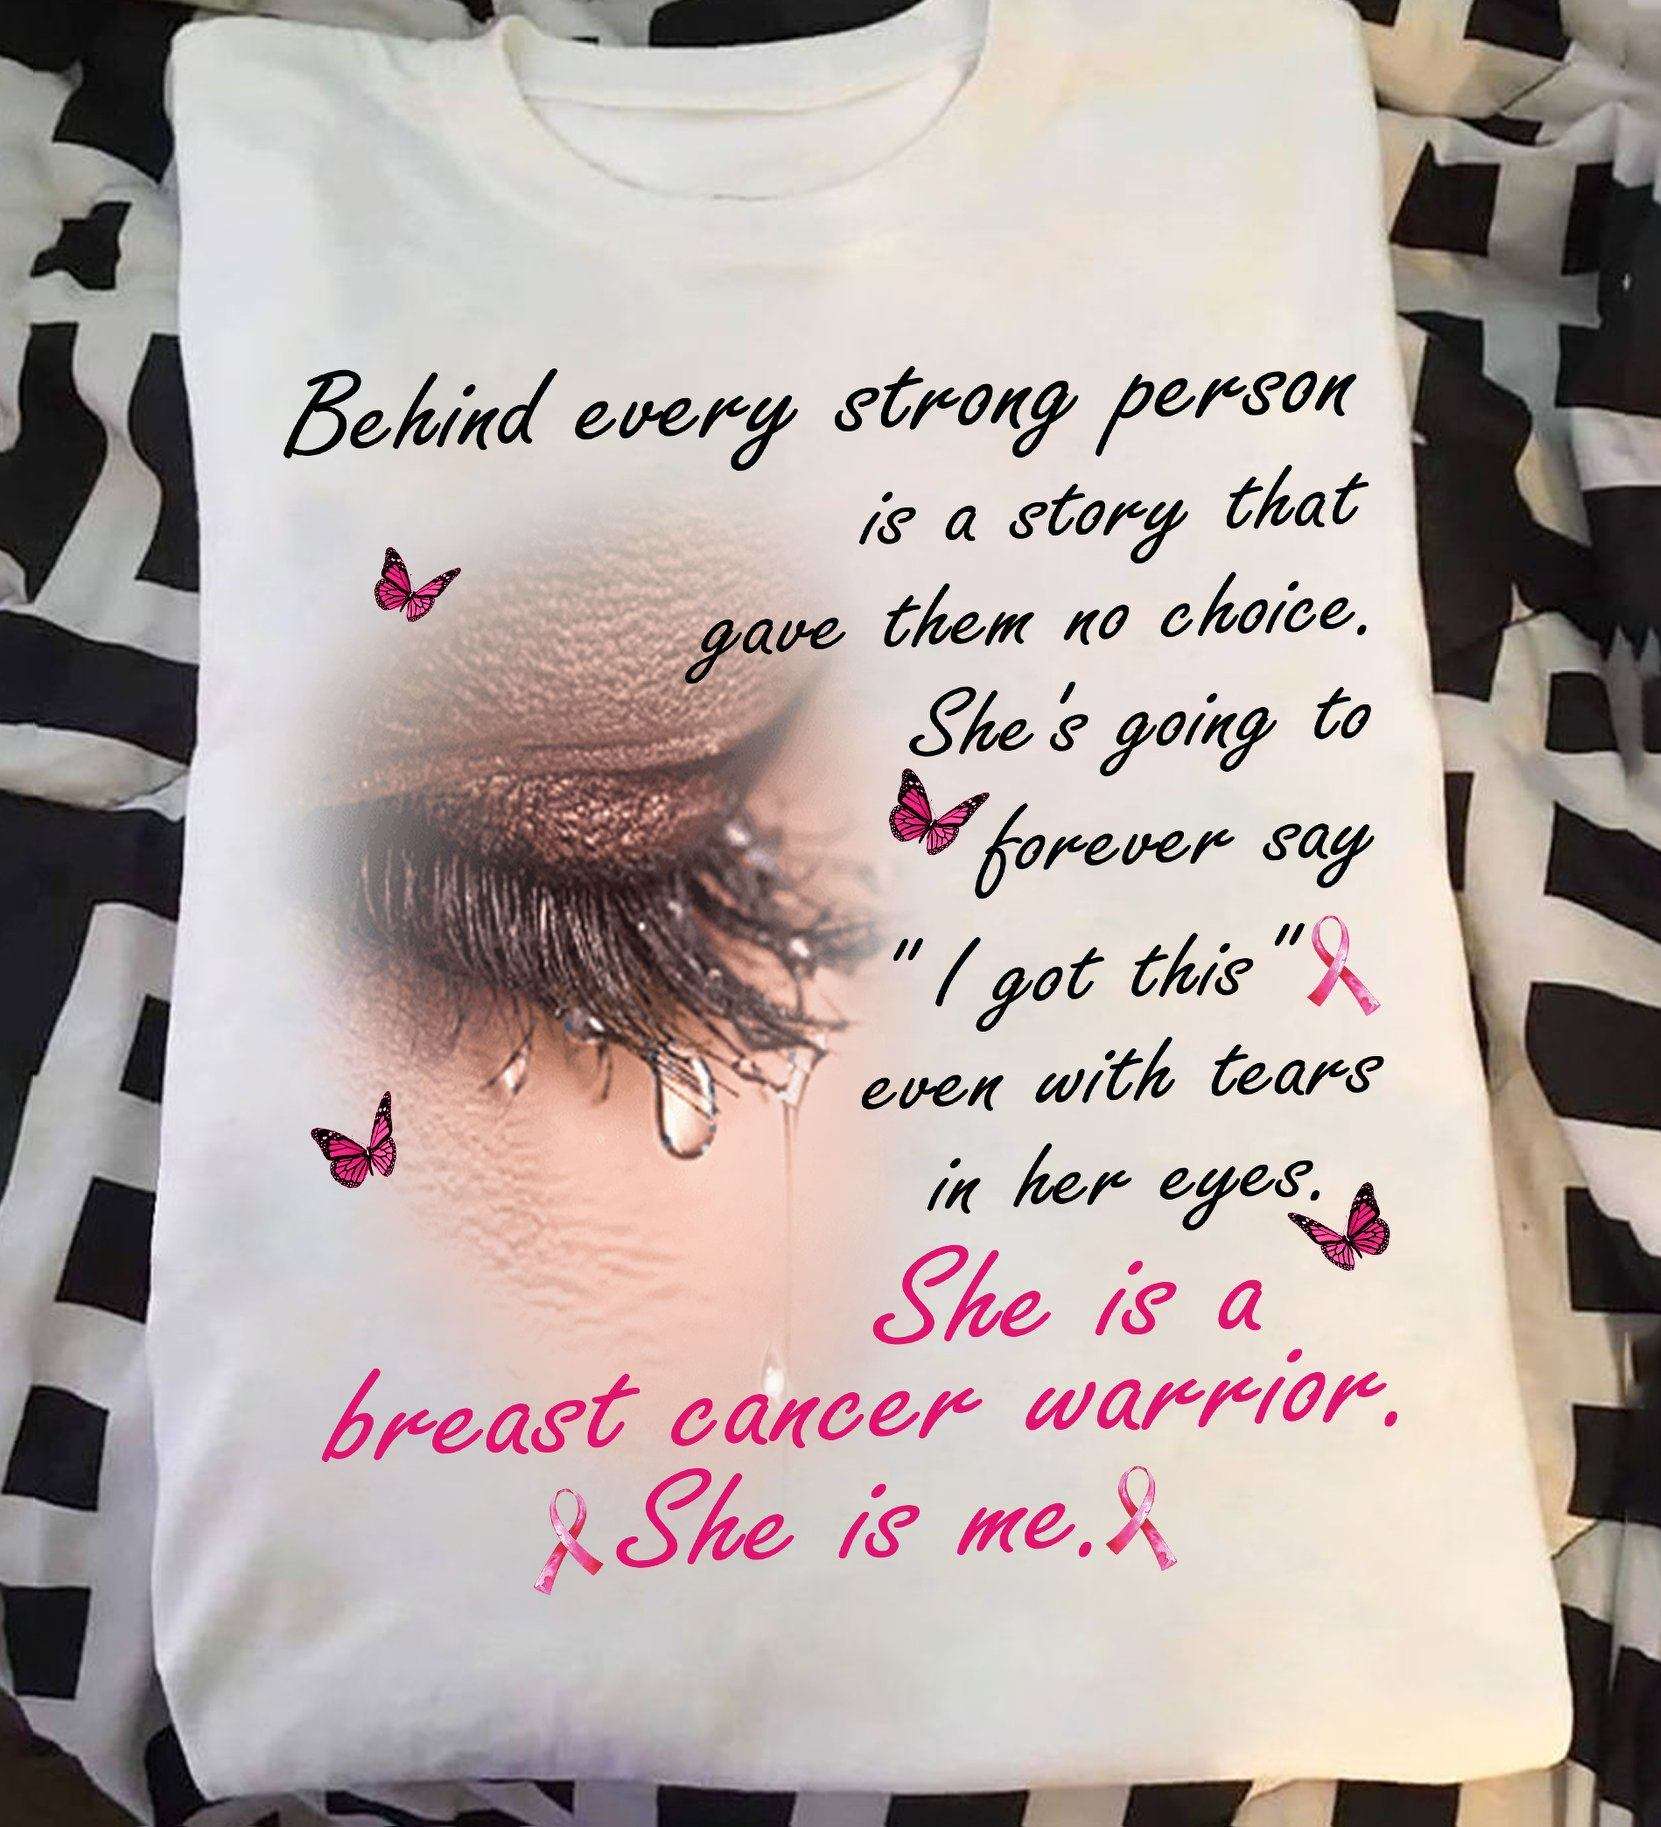 Behind every strong person is a story that gave them no choice she is a breast cancer warrior